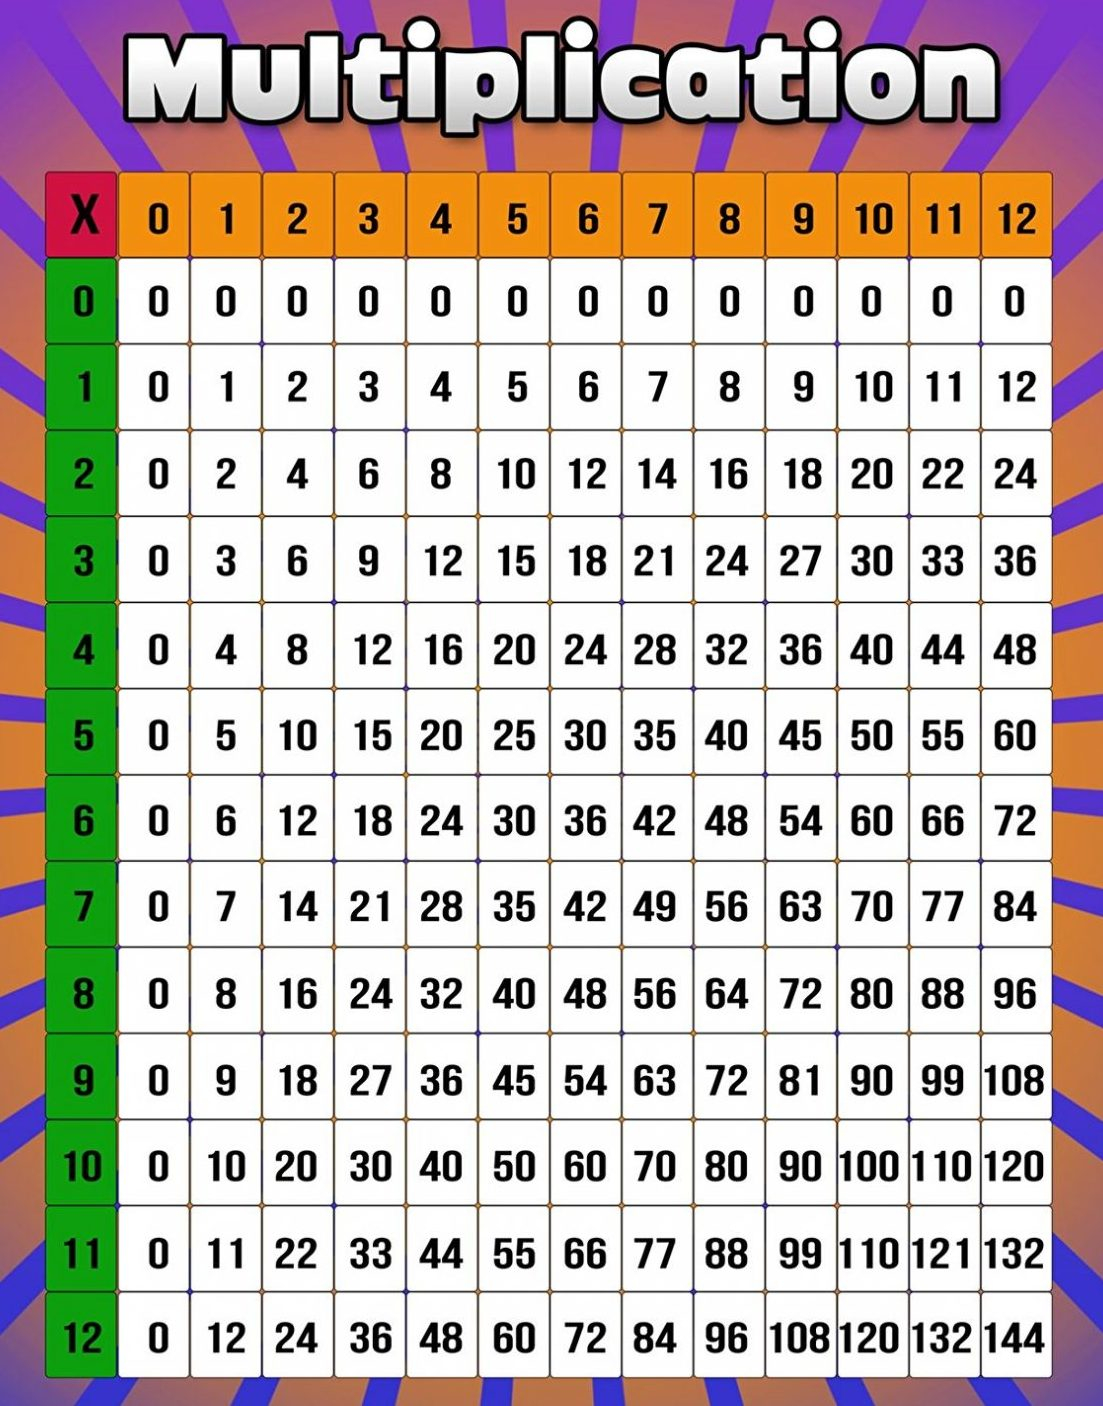 multiplication table 1 to 12 pdf download